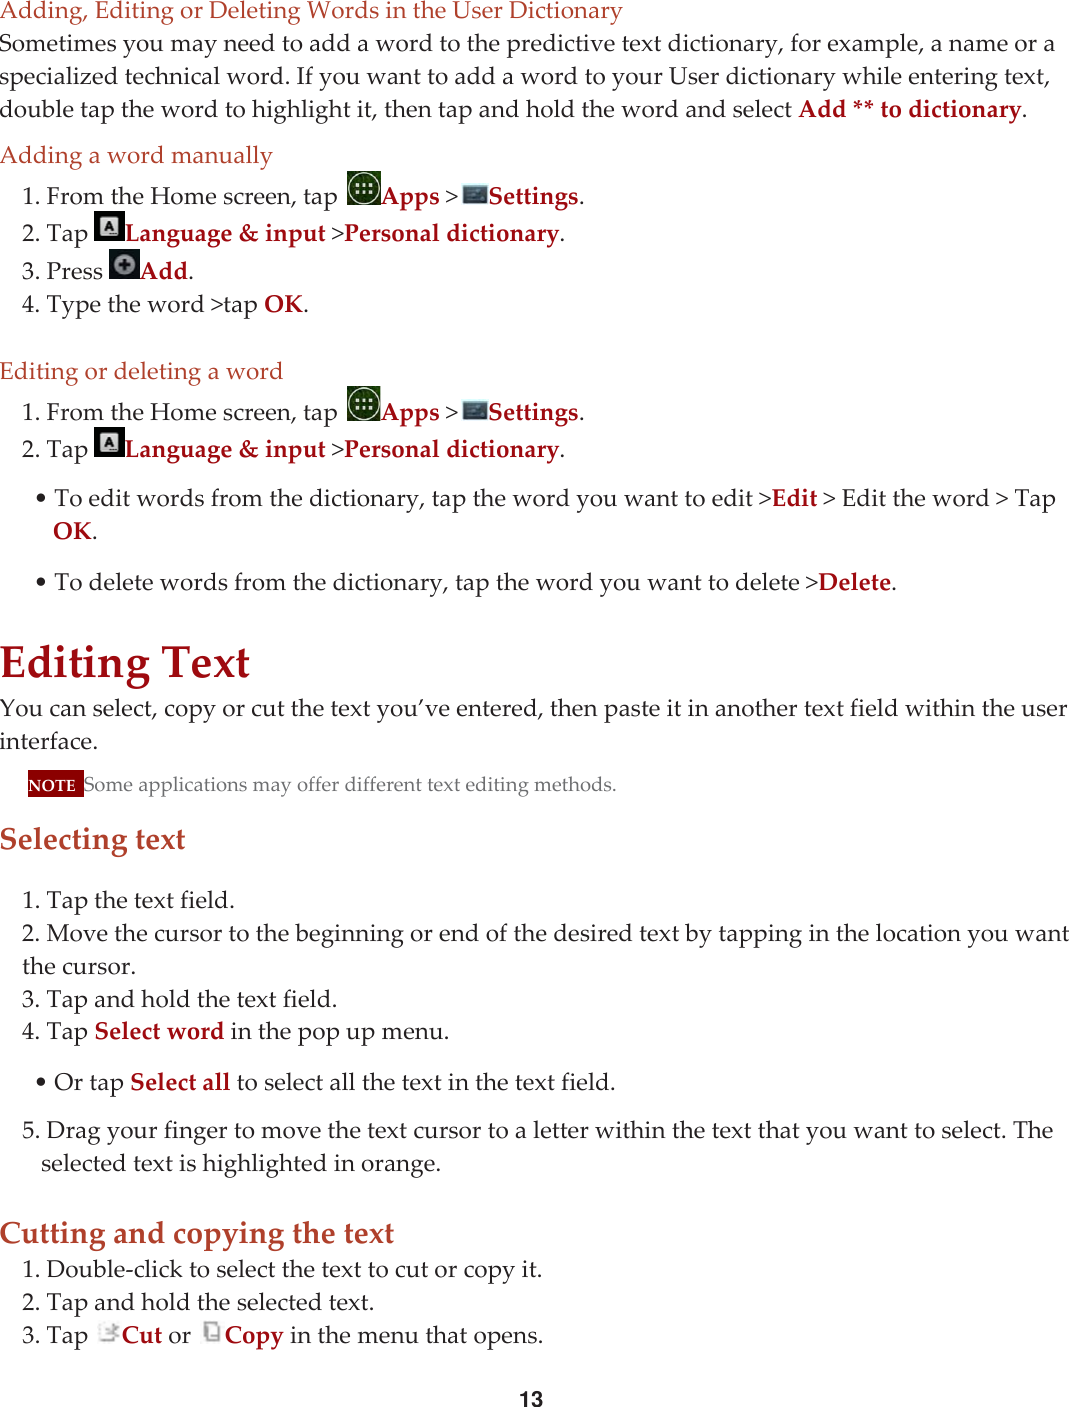 13Adding,EditingorDeletingWordsintheUserDictionarySometimesyoumayneedtoaddawordtothepredictivetextdictionary,forexample,anameoraspecializedtechnicalword.IfyouwanttoaddawordtoyourUserdictionarywhileenteringtext,doubletapthewordtohighlightit,thentapandholdthewordandselectAdd**todictionary.Addingawordmanually1.FromtheHomescreen,tapApps&gt;Settings.2.TapLanguage&amp;input&gt;Personaldictionary.3.PressAdd.4.Typetheword&gt;tapOK.Editingordeletingaword1.FromtheHomescreen,tapApps&gt;Settings.2.TapLanguage&amp;input&gt;Personaldictionary.•Toeditwordsfromthedictionary,tapthewordyouwanttoedit&gt;Edit&gt;Edittheword&gt;TapOK.•Todeletewordsfromthedictionary,tapthewordyouwanttodelete&gt;Delete.EditingTextYoucanselect,copyorcutthetextyou’veentered,thenpasteitinanothertextfieldwithintheuserinterface.NOTESomeapplicationsmayofferdifferenttexteditingmethods.Selectingtext1.Tapthetextfield.2.Movethecursortothebeginningorendofthedesiredtextbytappinginthelocationyouwantthecursor.3.Tapandholdthetextfield.4.TapSelectwordinthepopupmenu.•OrtapSelectalltoselectallthetextinthetextfield.5.Dragyourfingertomovethetextcursortoaletterwithinthetextthatyouwanttoselect.Theselectedtextishighlightedinorange.Cuttingandcopyingthetext1.Double‐clicktoselectthetexttocutorcopyit.2.Tapandholdtheselectedtext.3.TapCutorCopyinthemenuthatopens.